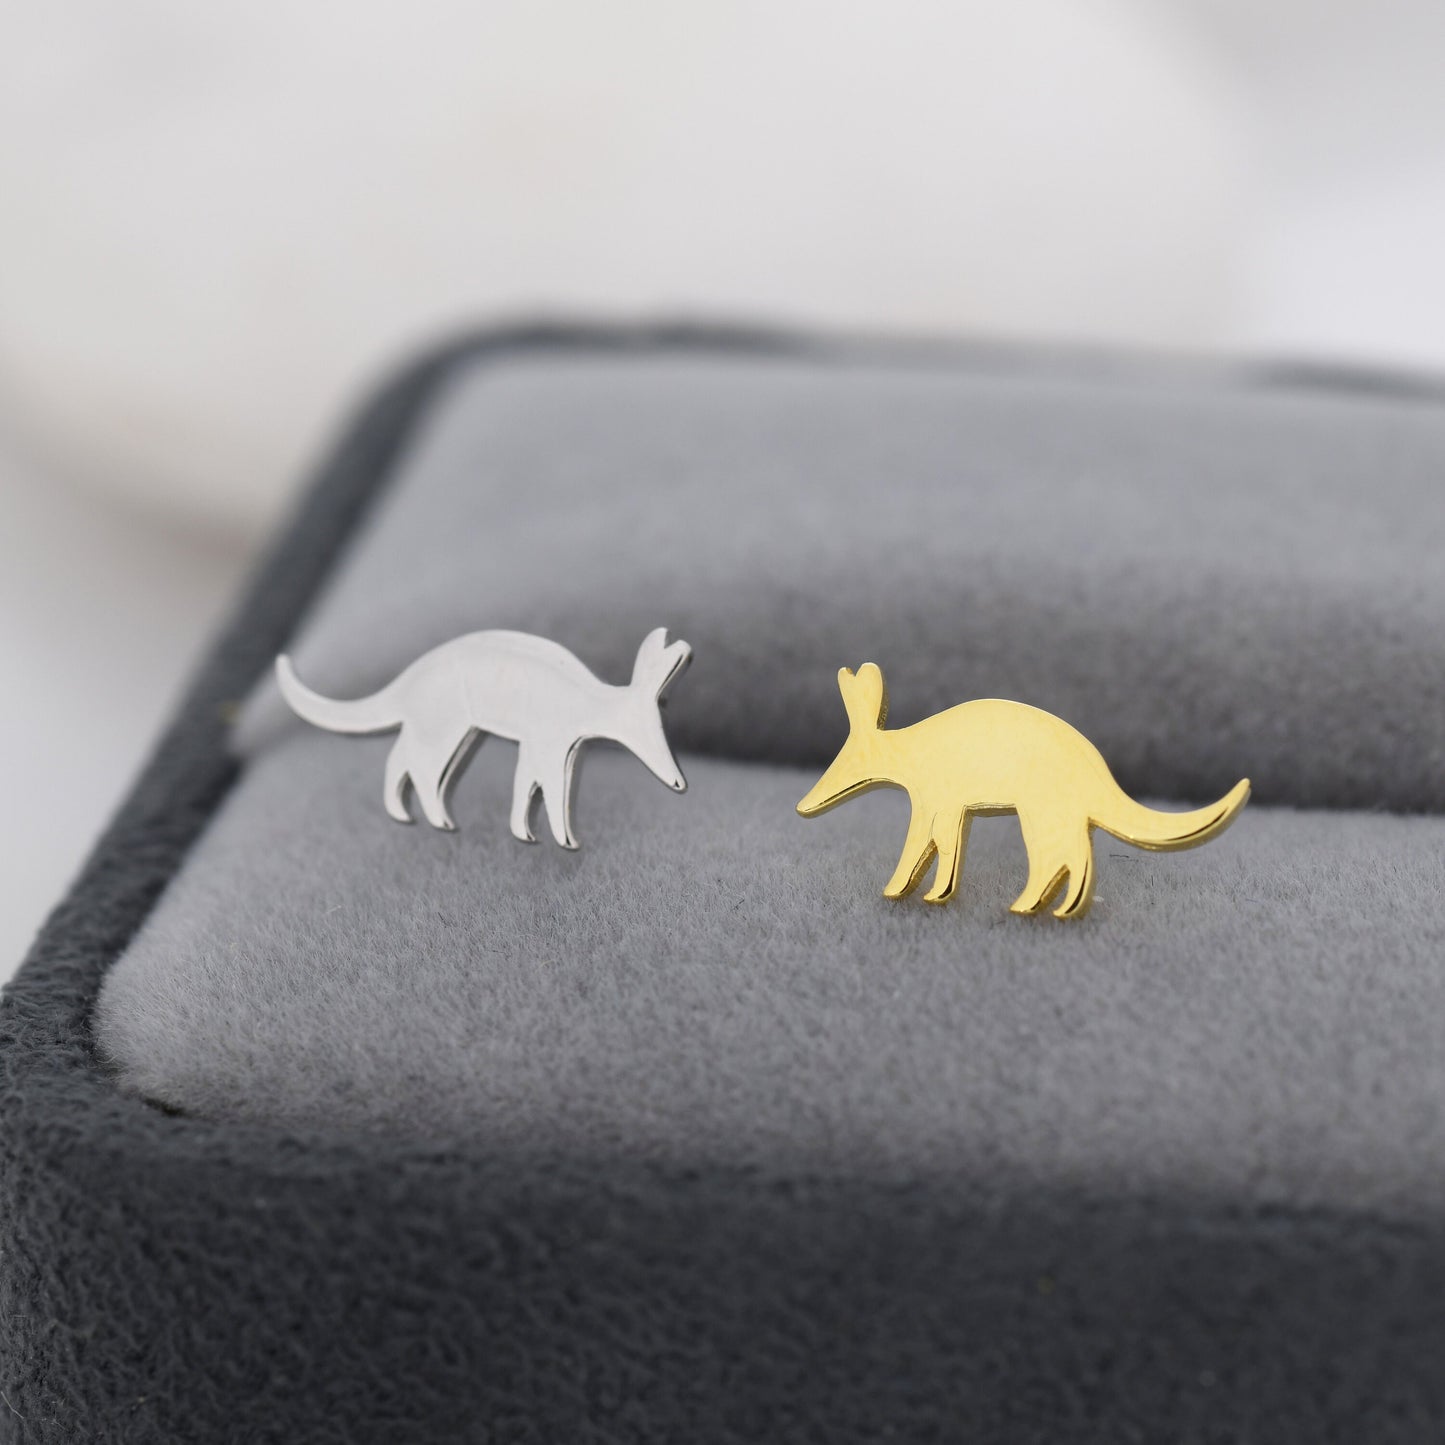 Aardvark Stud Earrings in Sterling Silver, Silver or Gold, Nature Inspired Animal Design